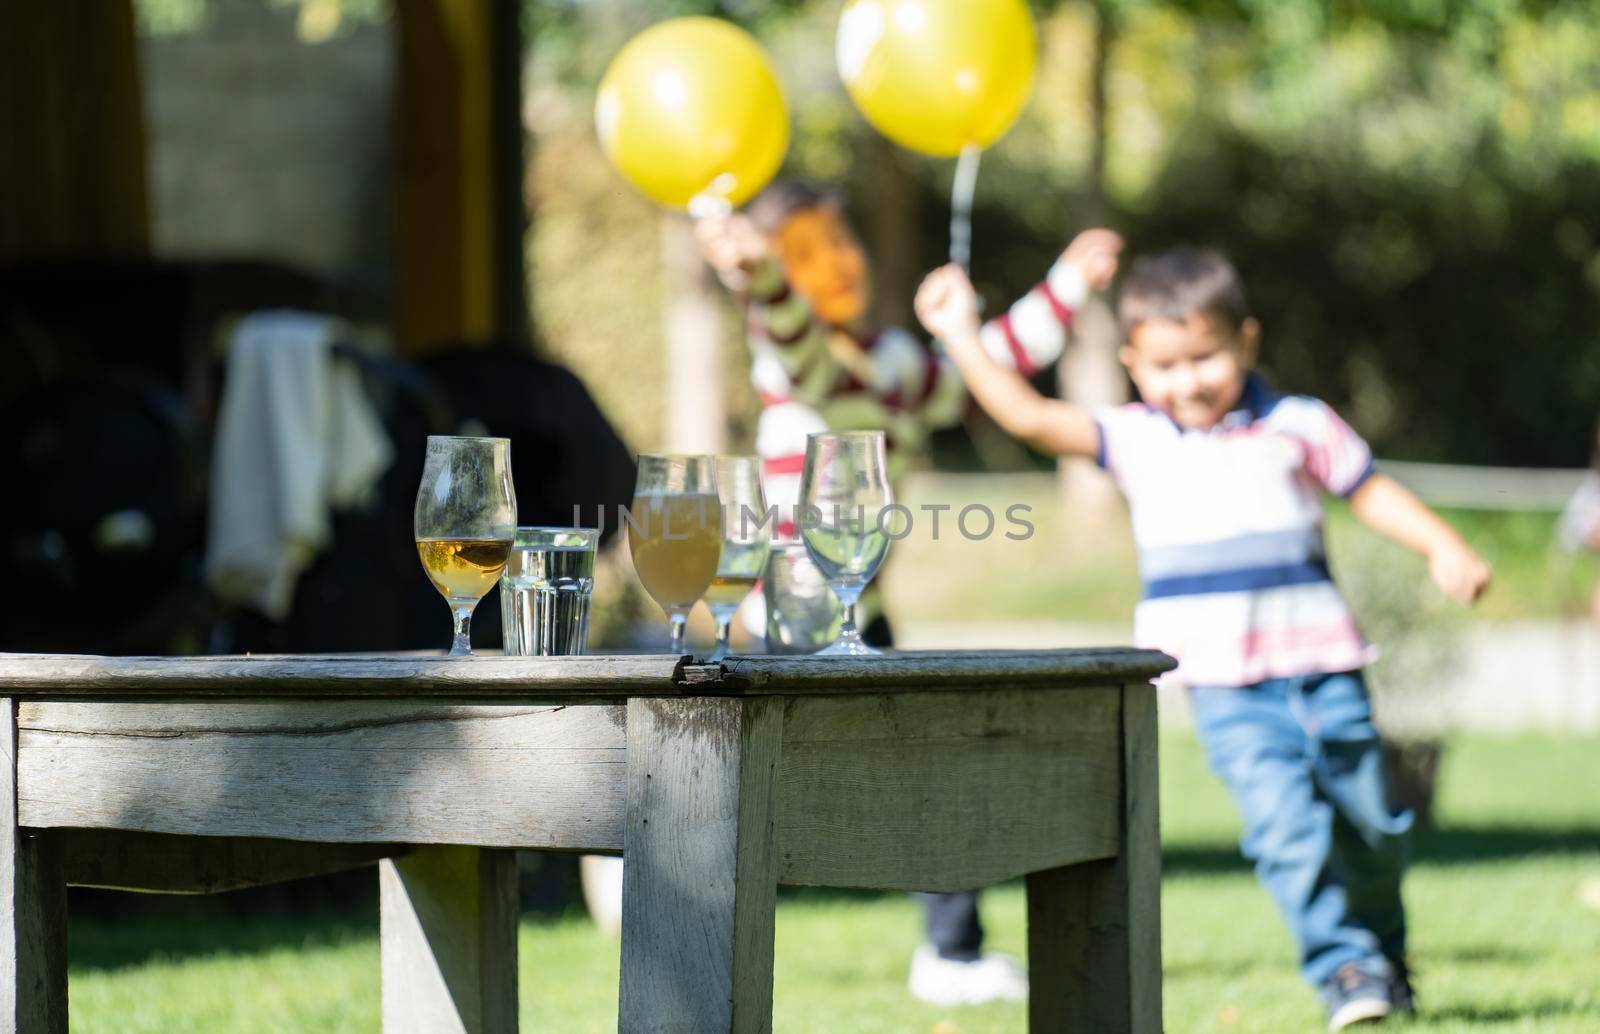 Glasses with beer and water on a vintage table during a party. Happy children playfully running with yellow balloons on blurred background.